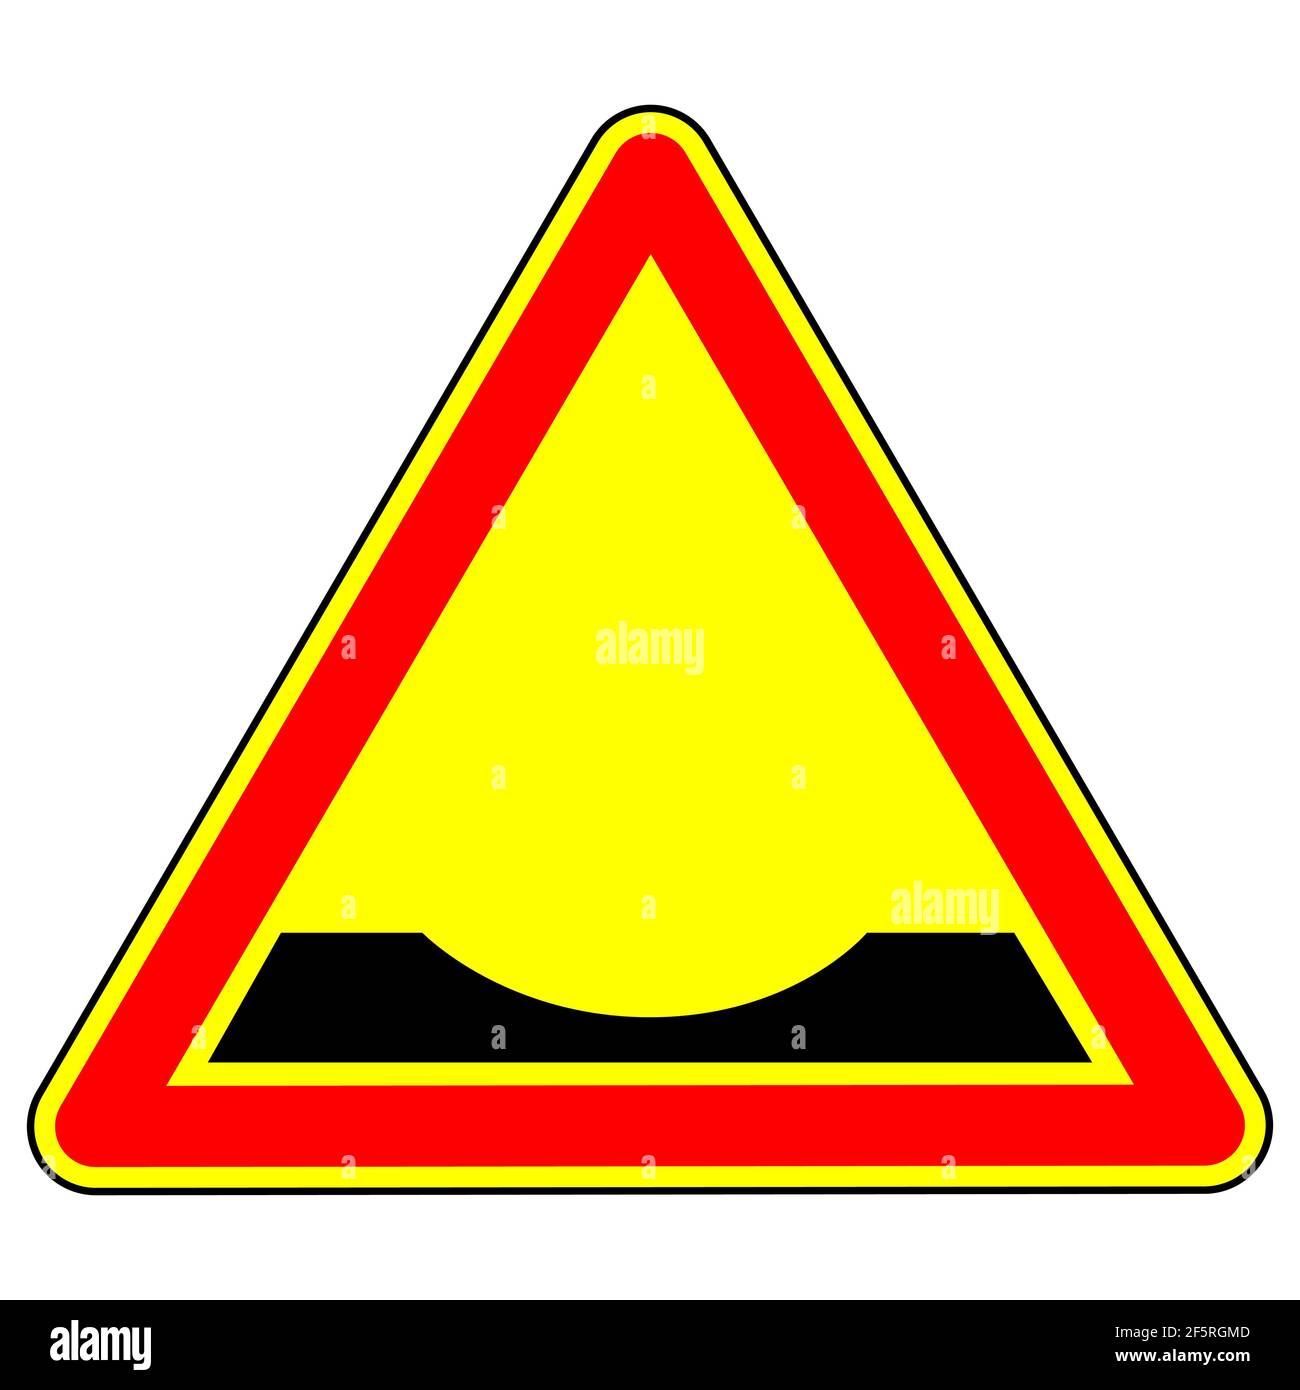 Warning traffic sign Pothole. Traffic Laws. Signs and road markings. The isolated object on a white background. Vector Stock Vector